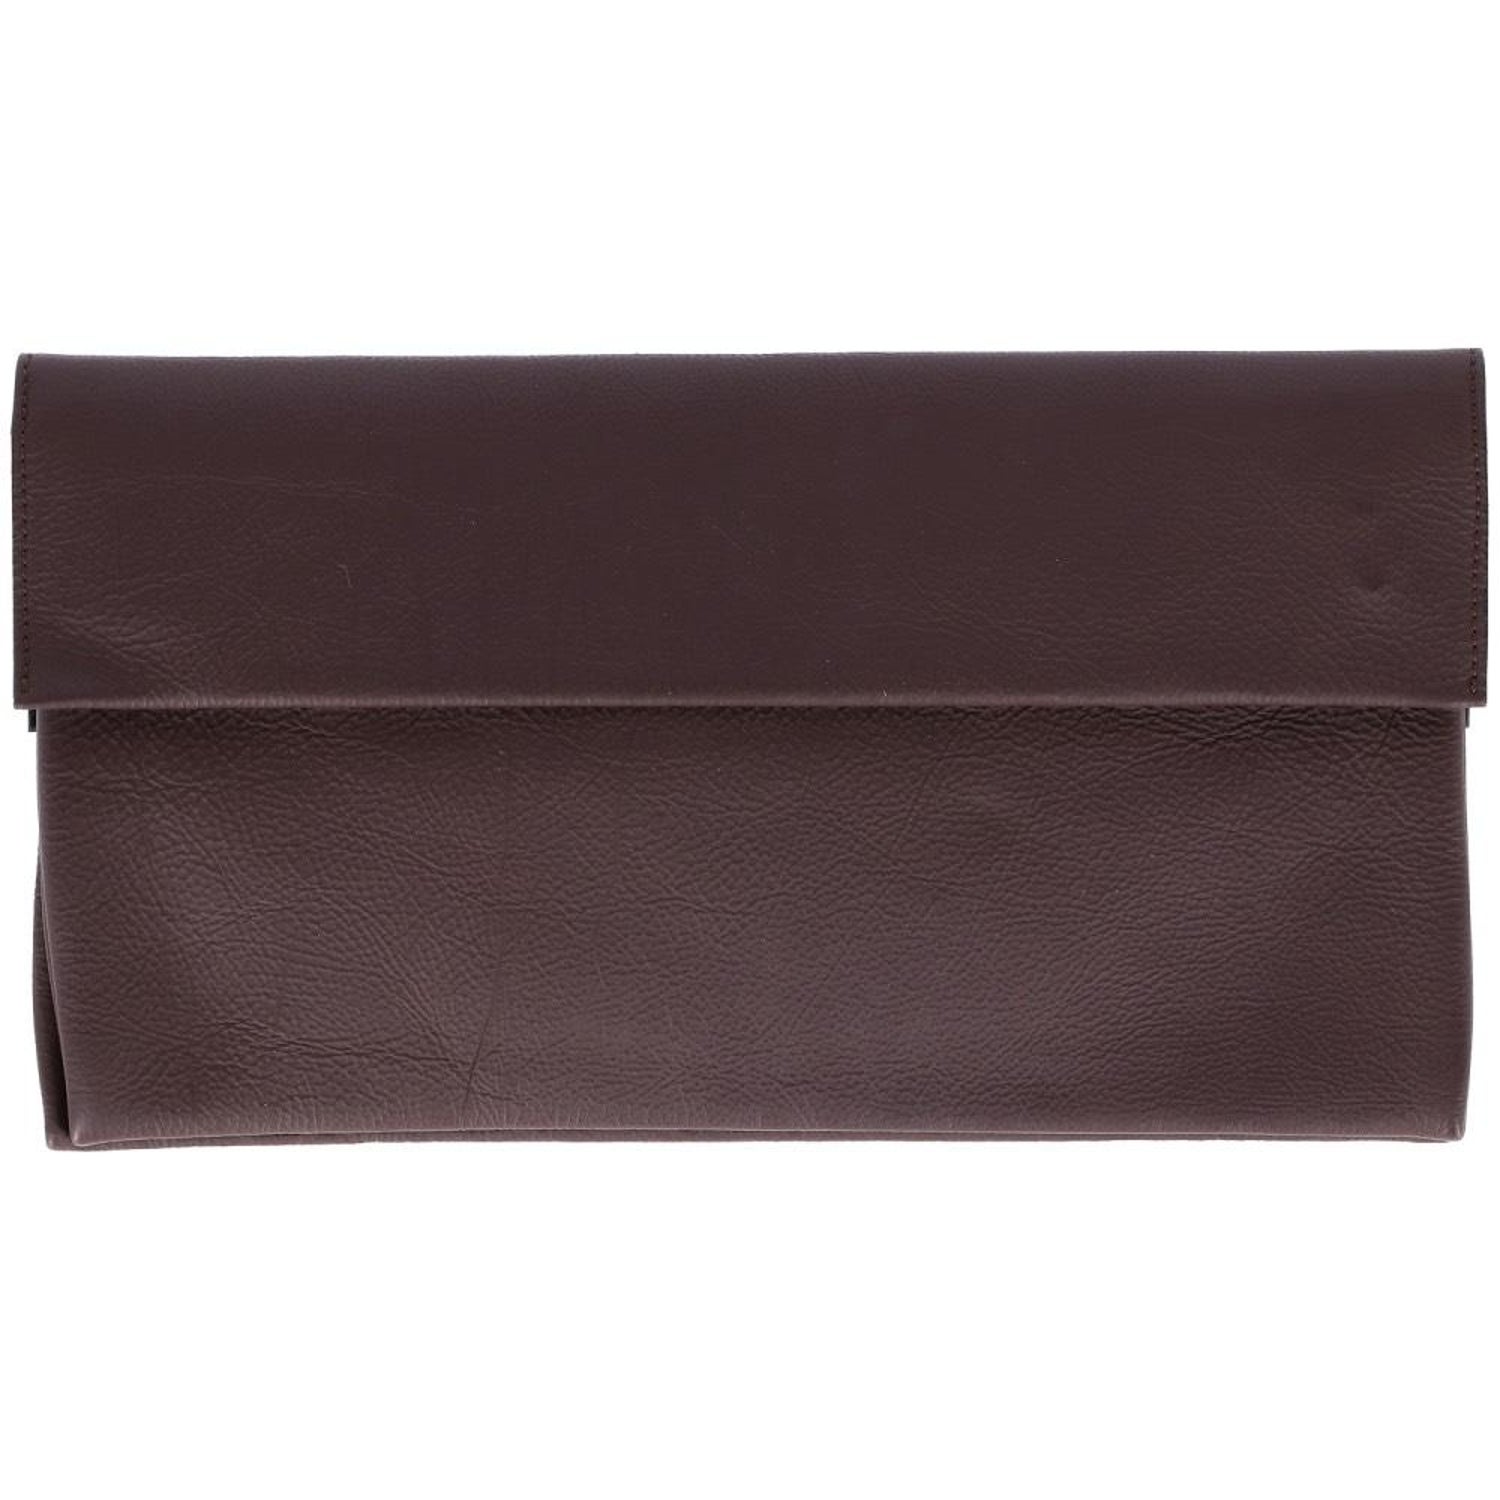 2000s Marni brown leather clutch bag For Sale at 1stDibs